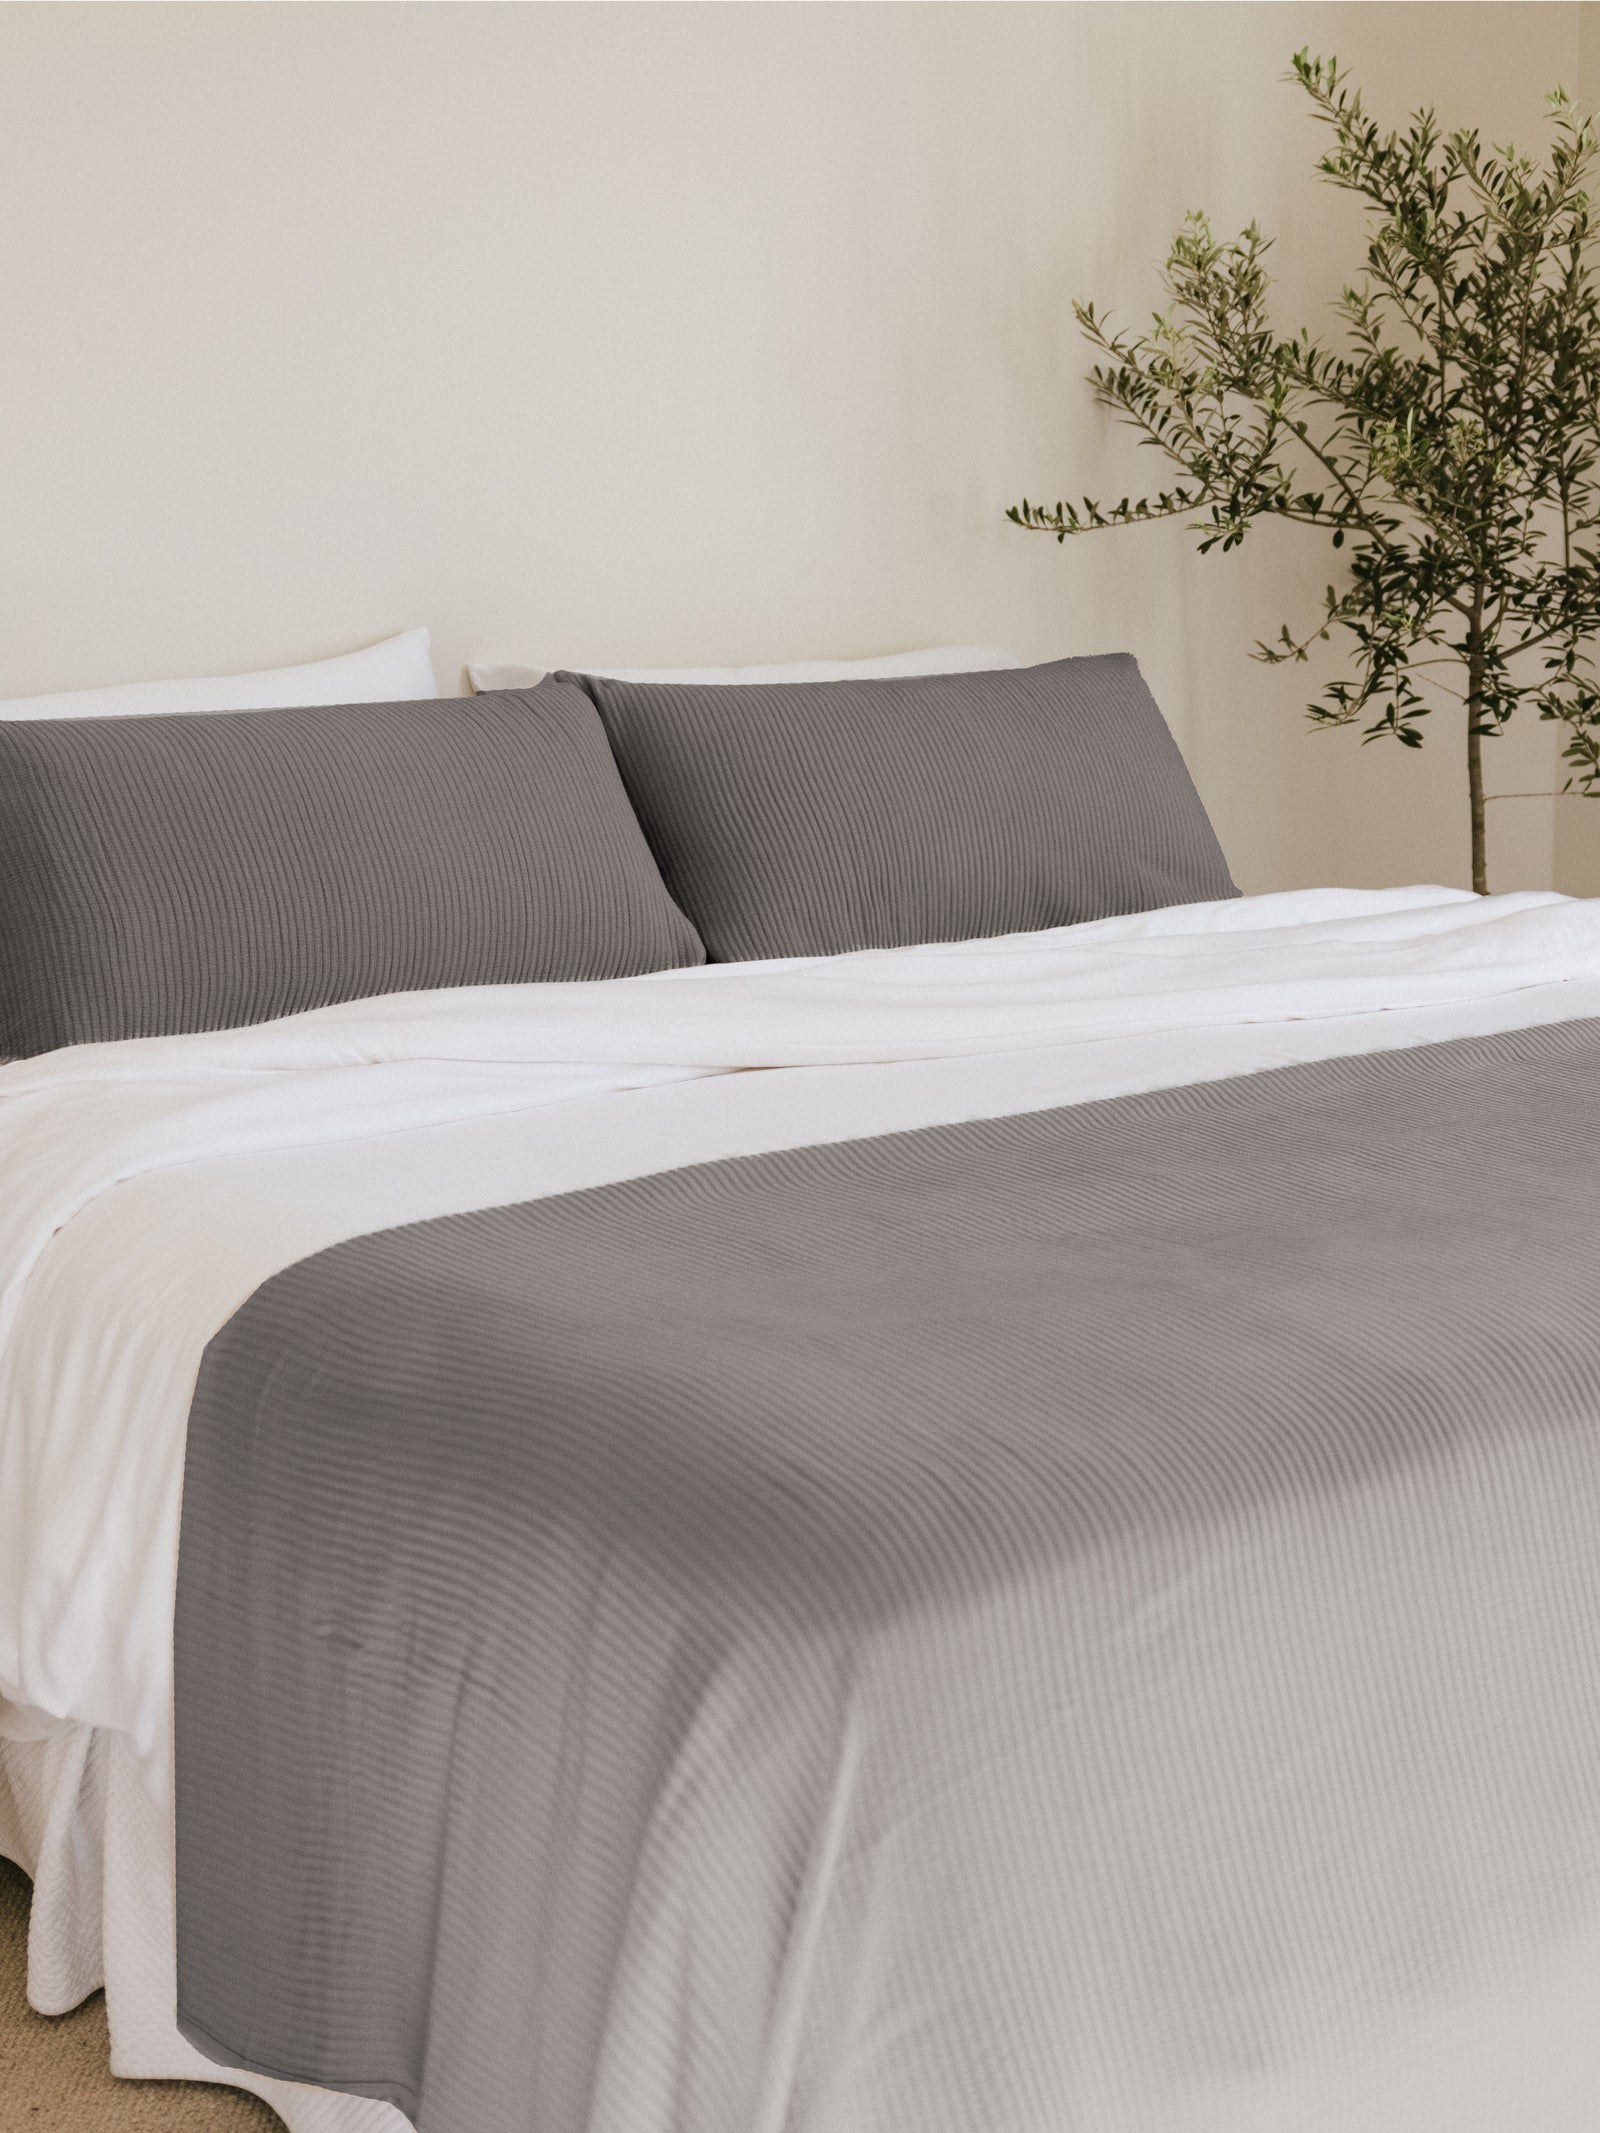 Charcoal coverlet and shams on a bed 